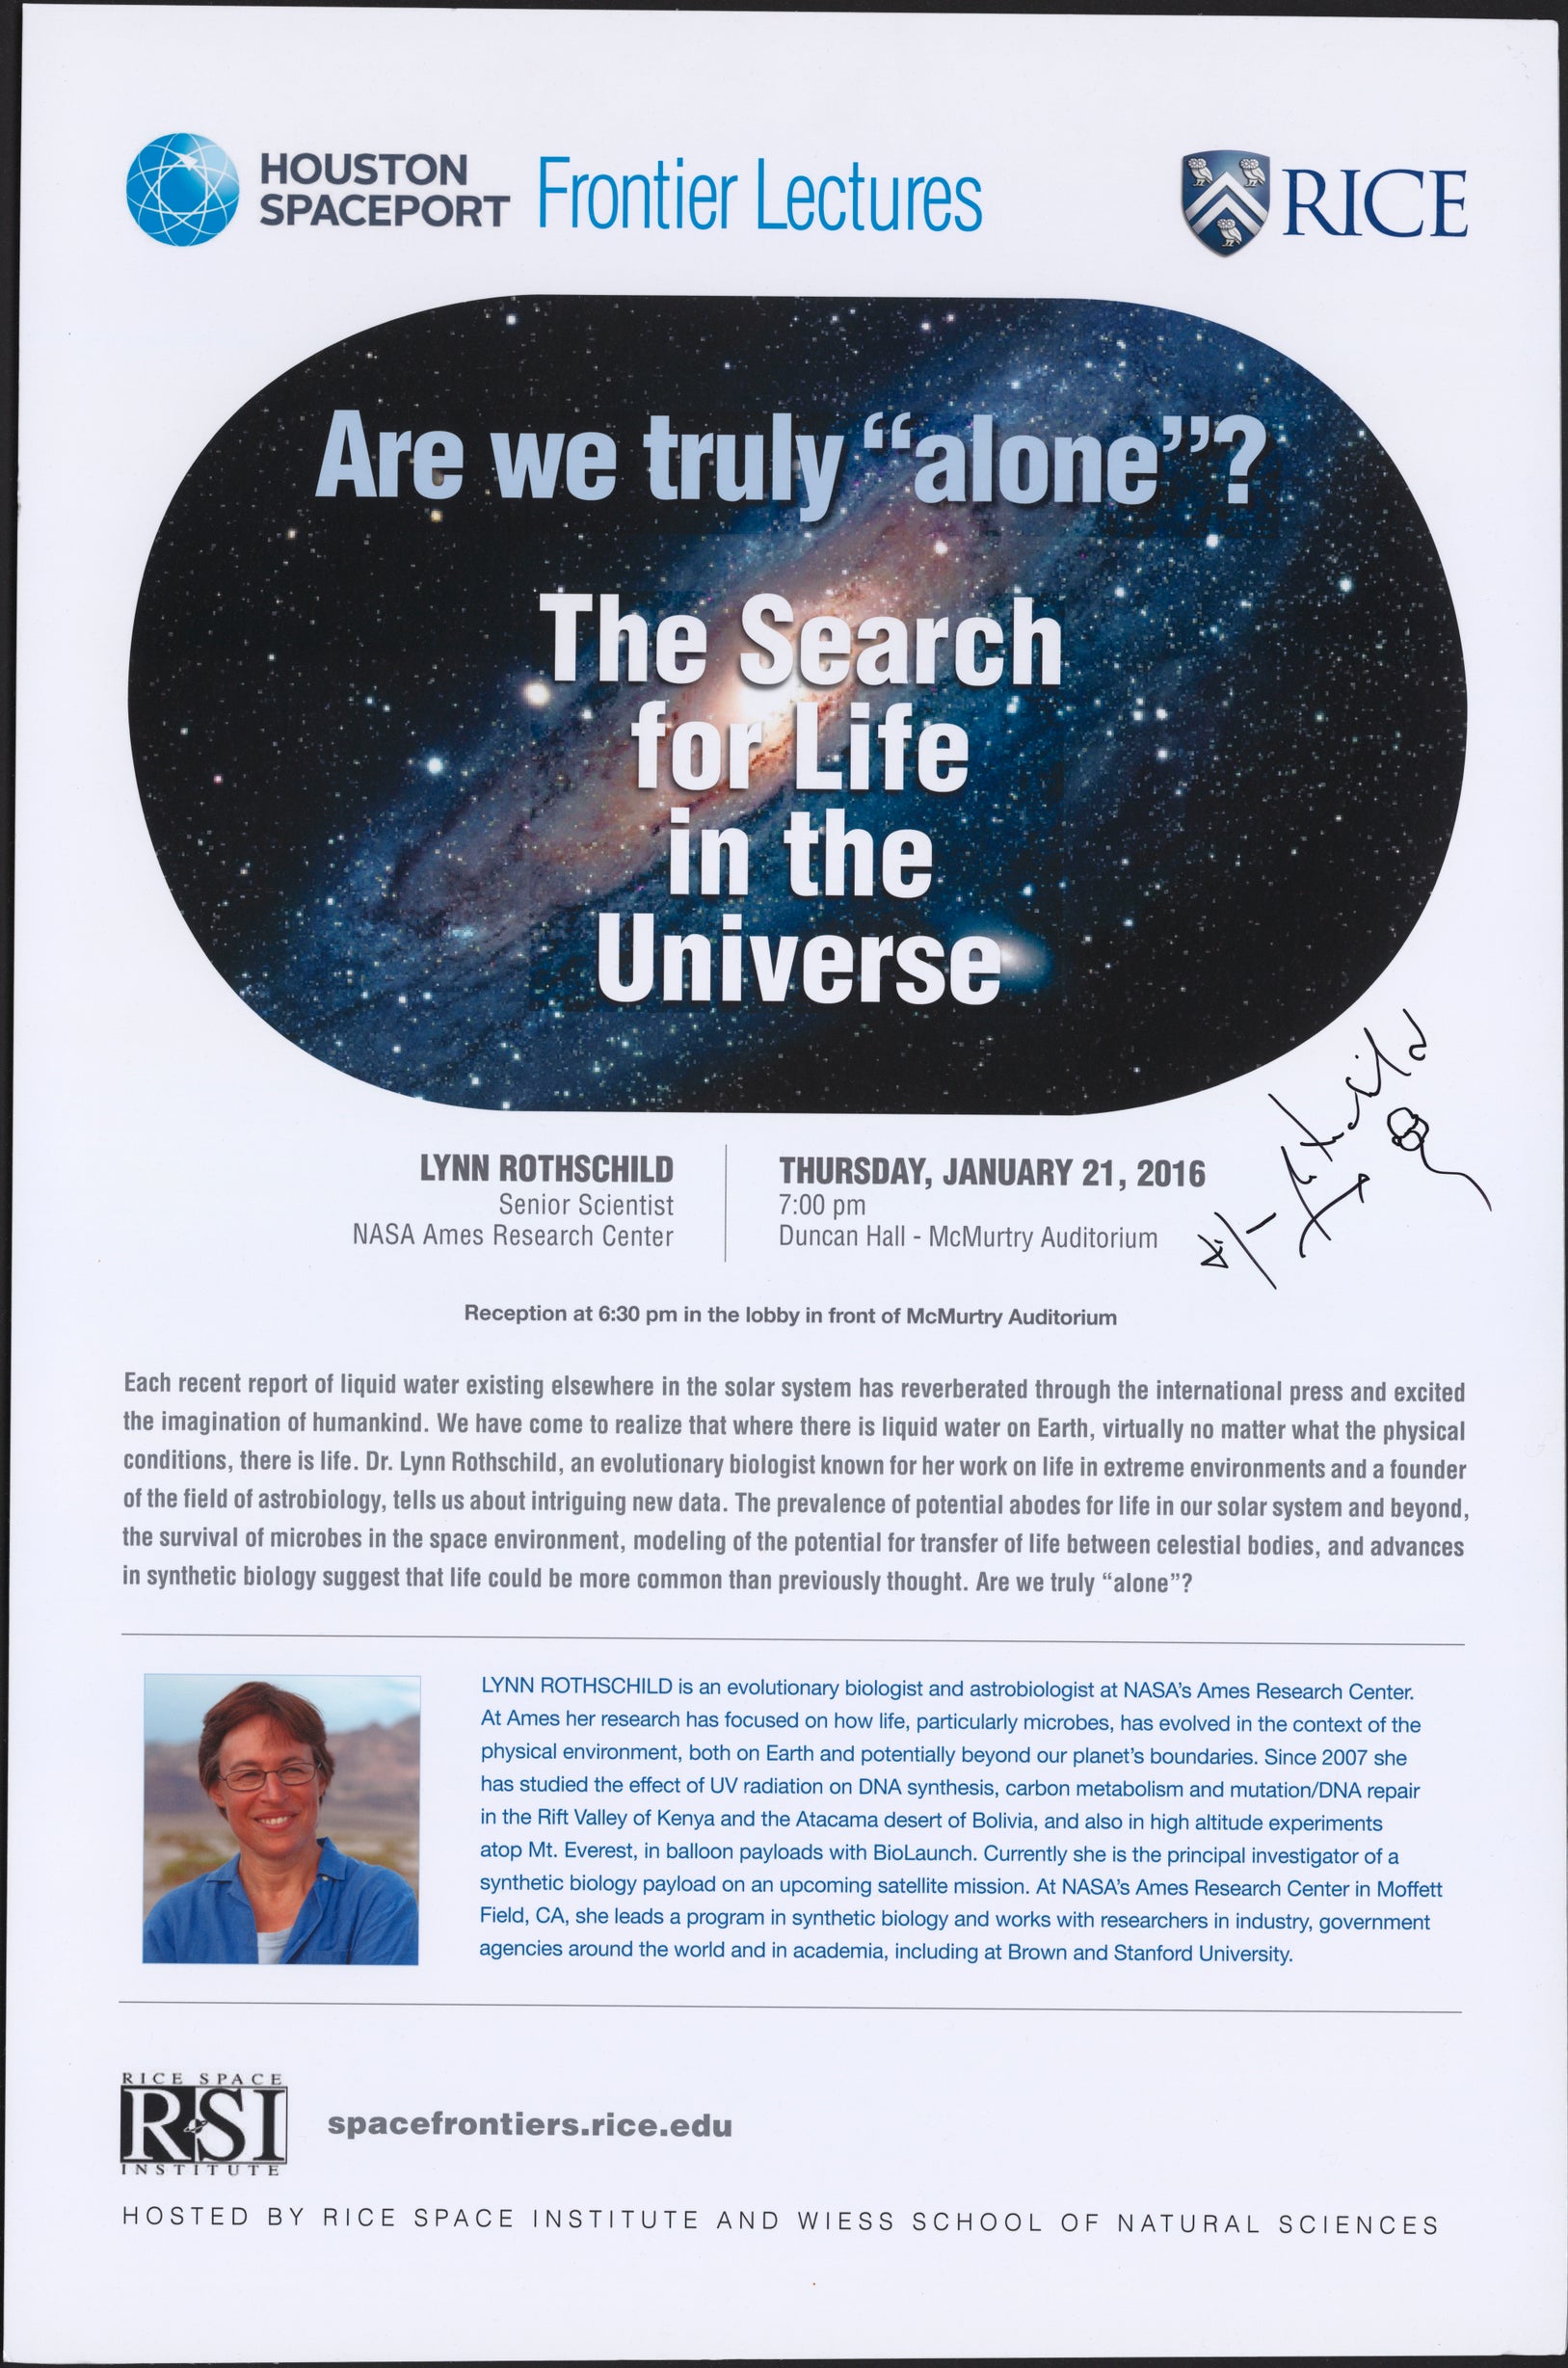 Poster of "Are we truly “alone”? The Search for Life in the Universe" by Lynn Rothschild